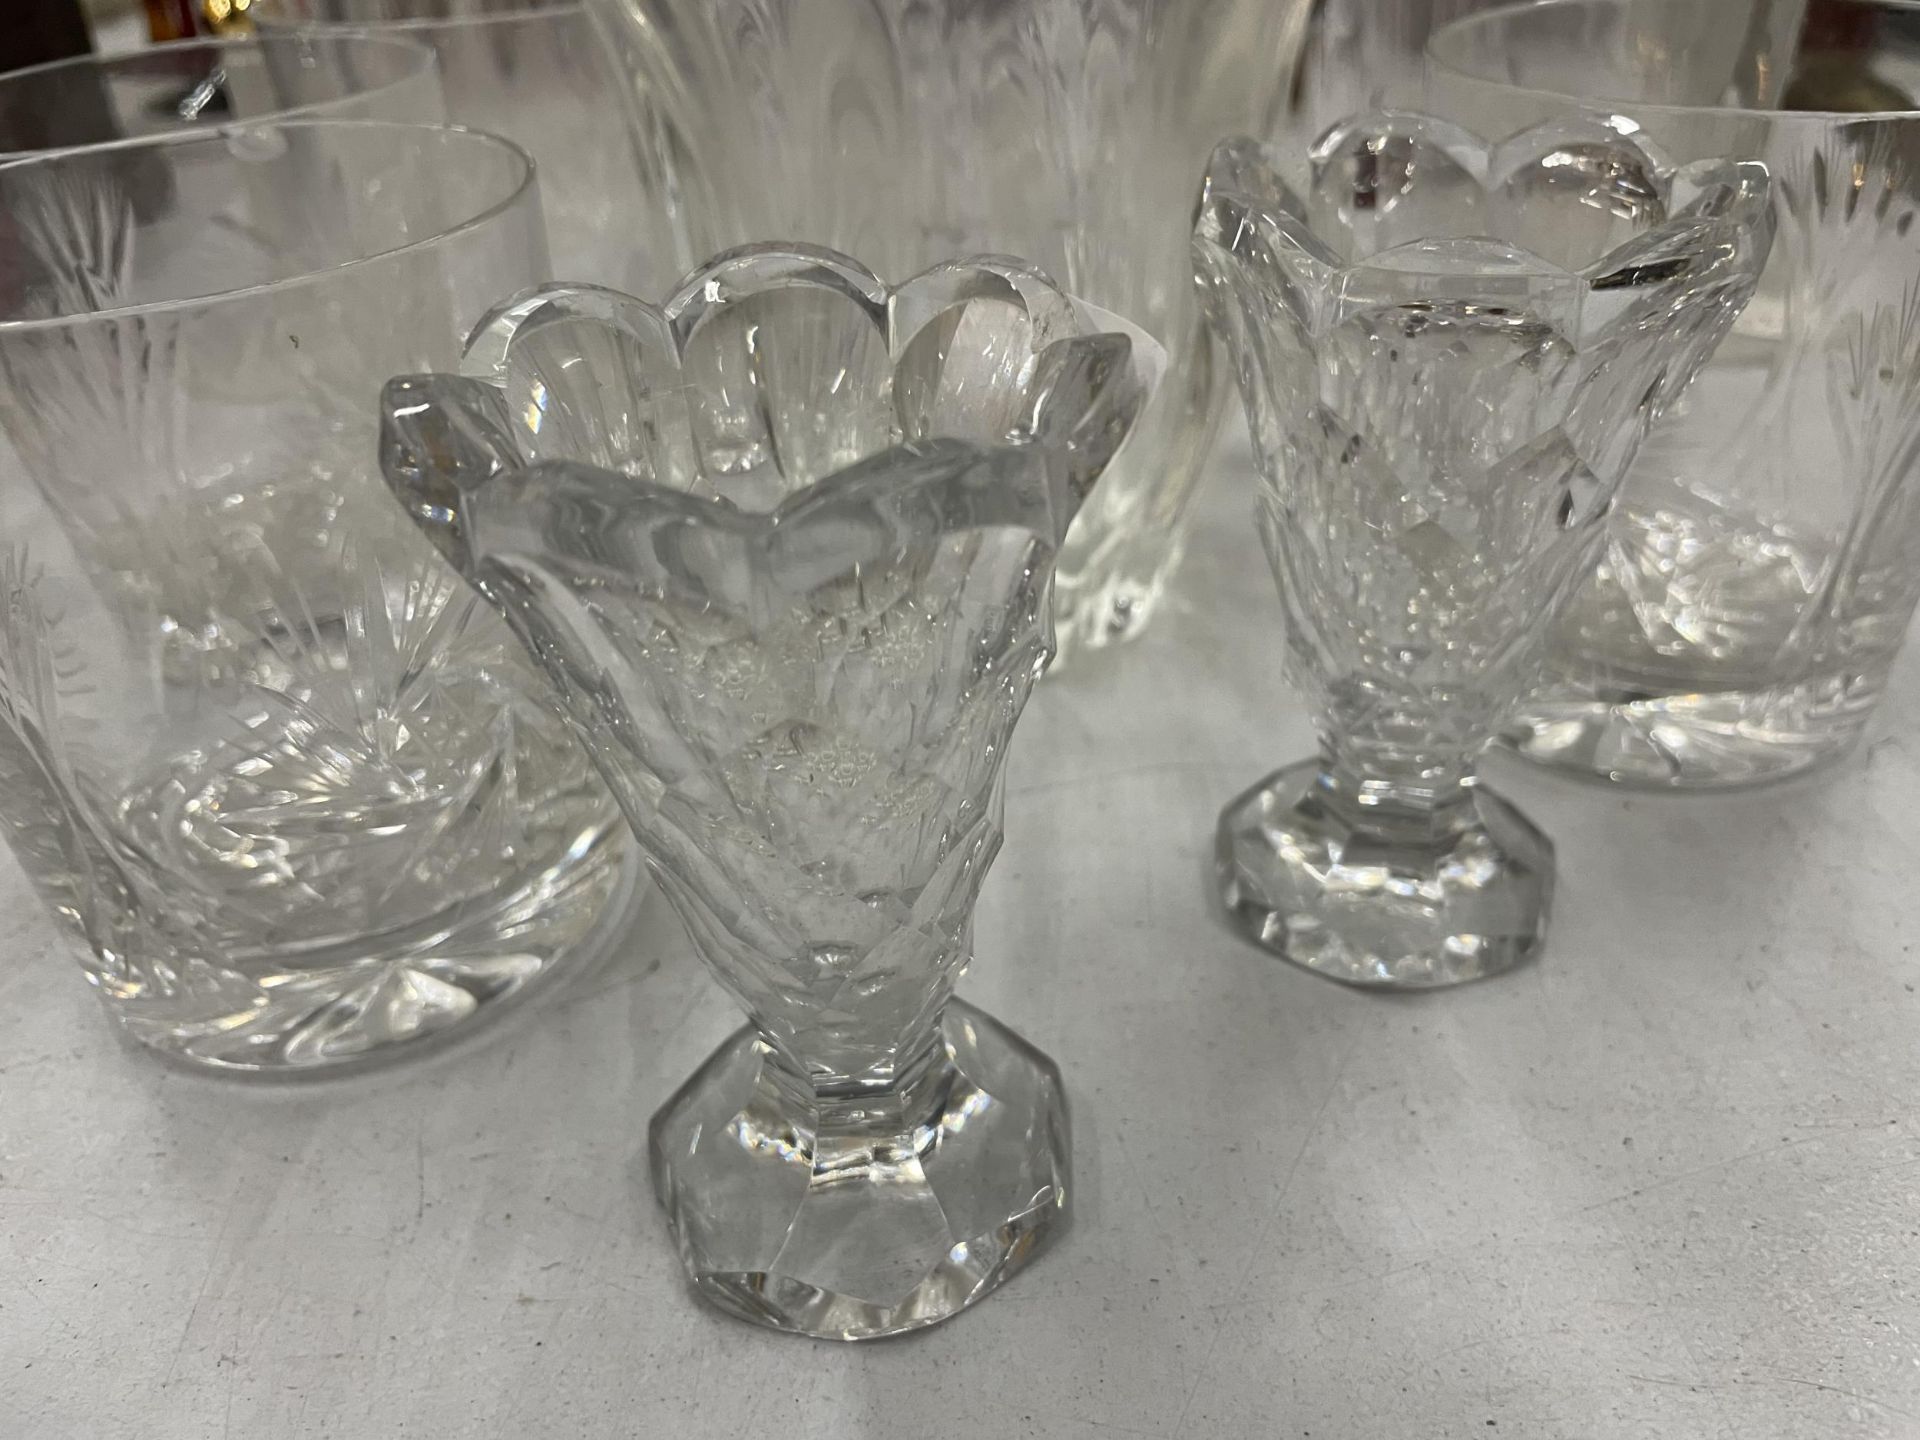 A QUANTITY OF GLASSWARE TO INCLUDE CANDLESTICKS, DECANTERS, JUG, VASE ETC - Image 3 of 3